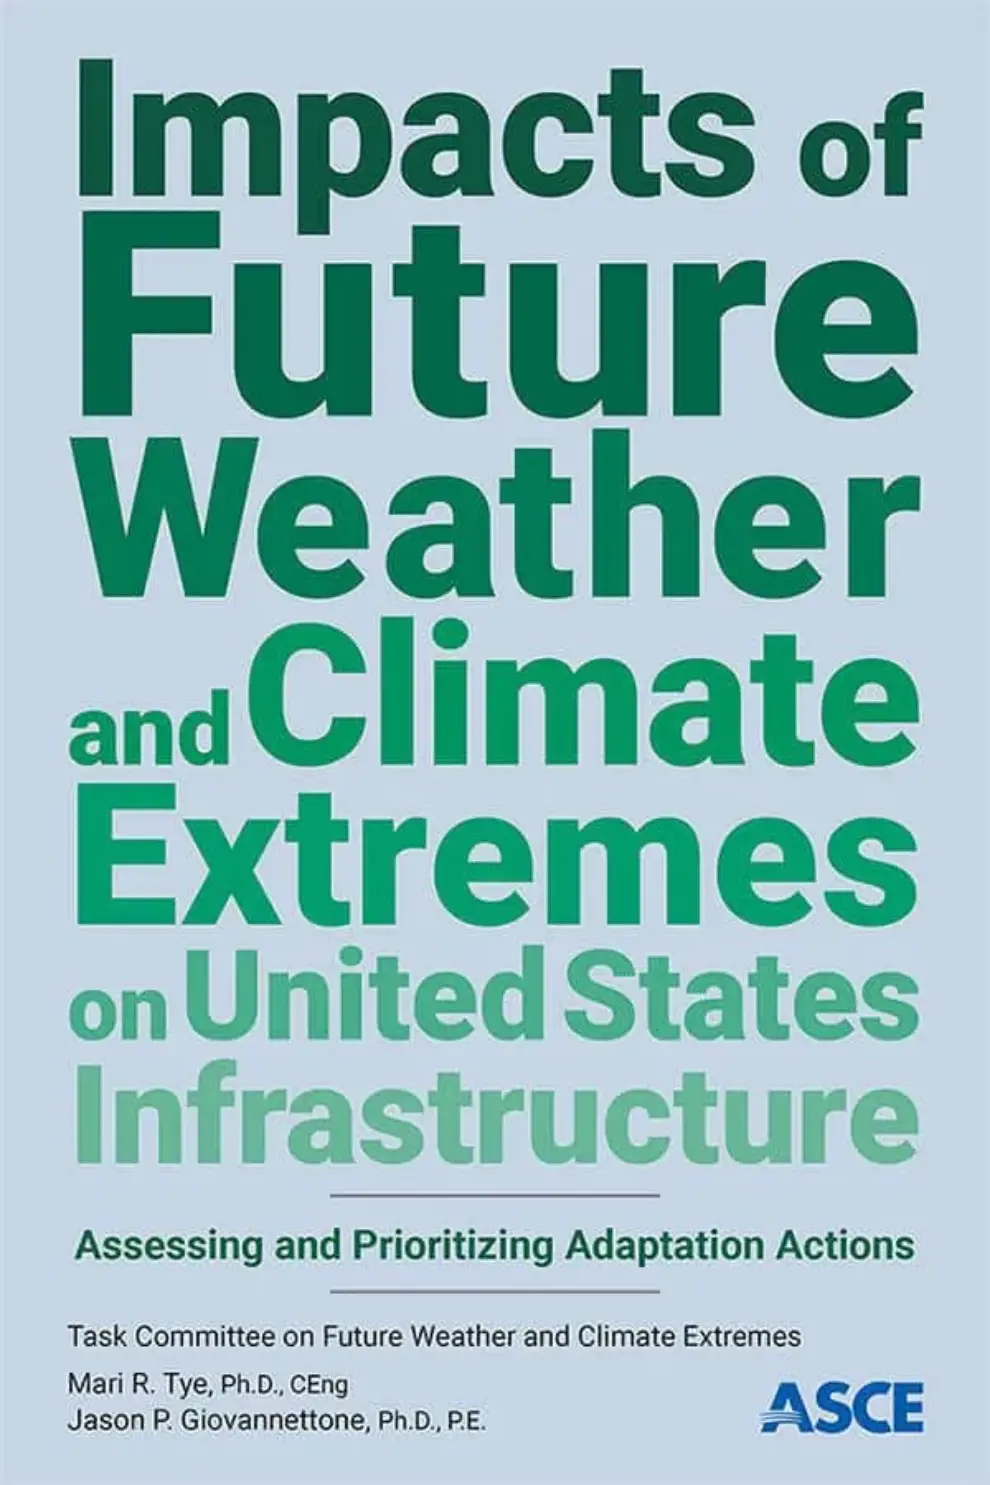 New ASCE Publication Provides Framework to Project Future Weather and Climate Extremes